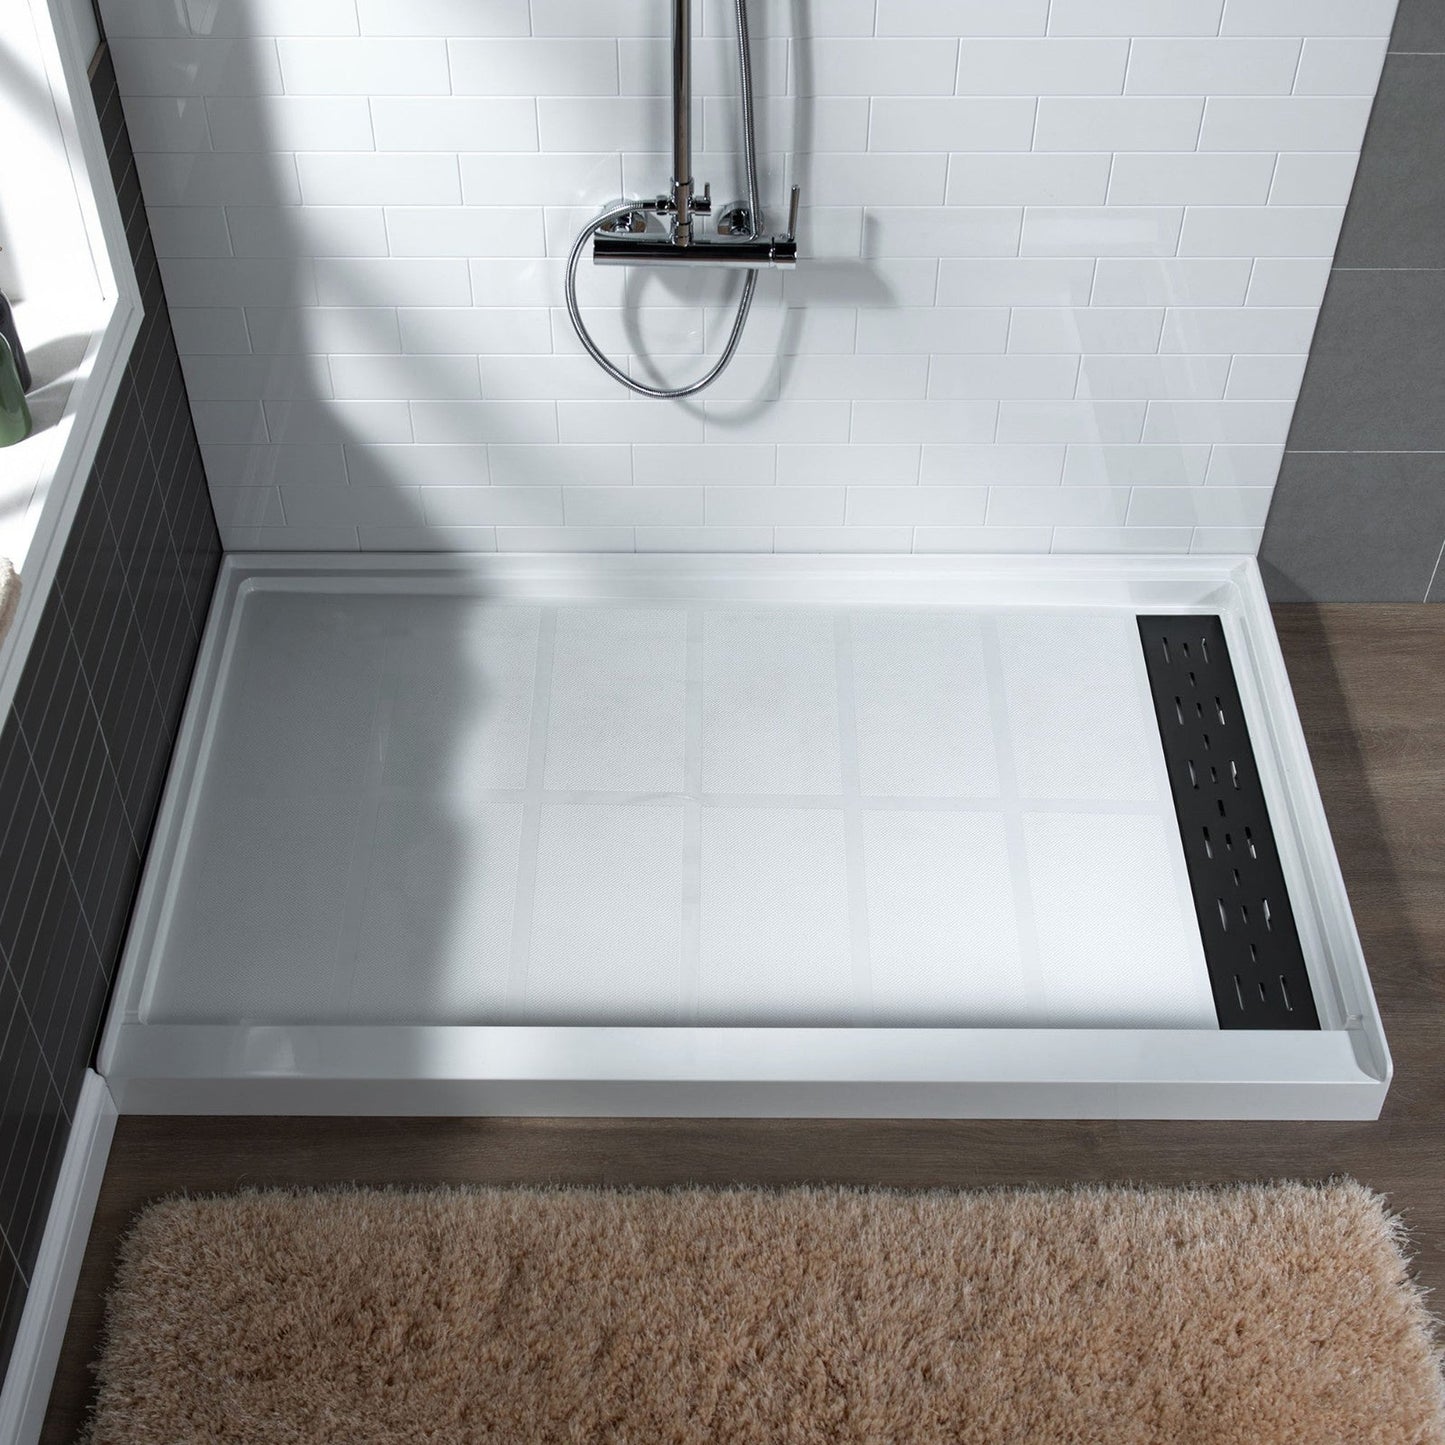 WoodBridge 60" x 36" White Solid Surface Shower Base Right Drain Location With Matte Black Trench Drain Cover